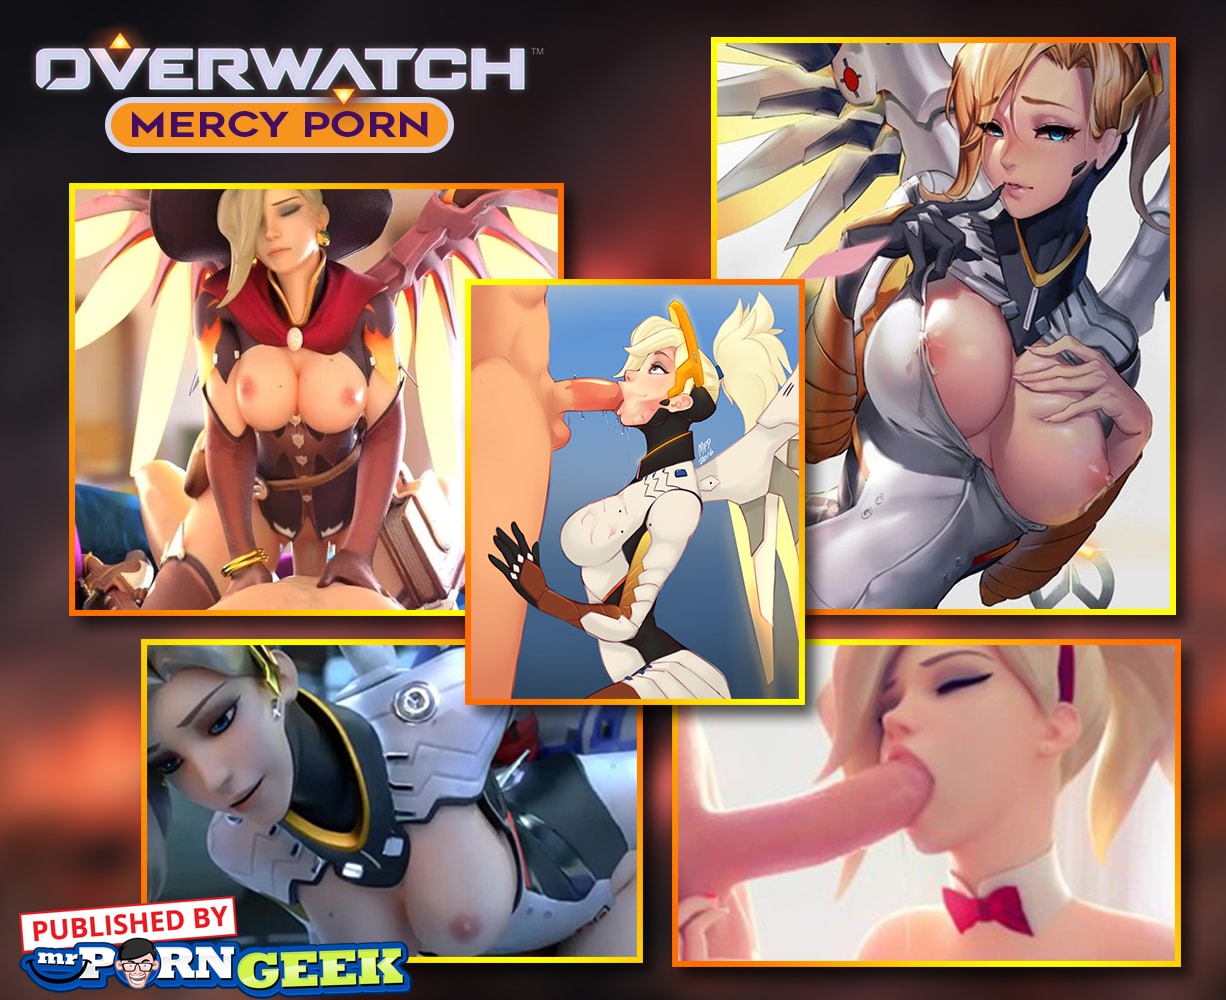 Make Overwatch Porn - Overwatch You Look So Good - Best Sex Photos, Hot Porn Pics and Free XXX  Images on www.slashporn.net